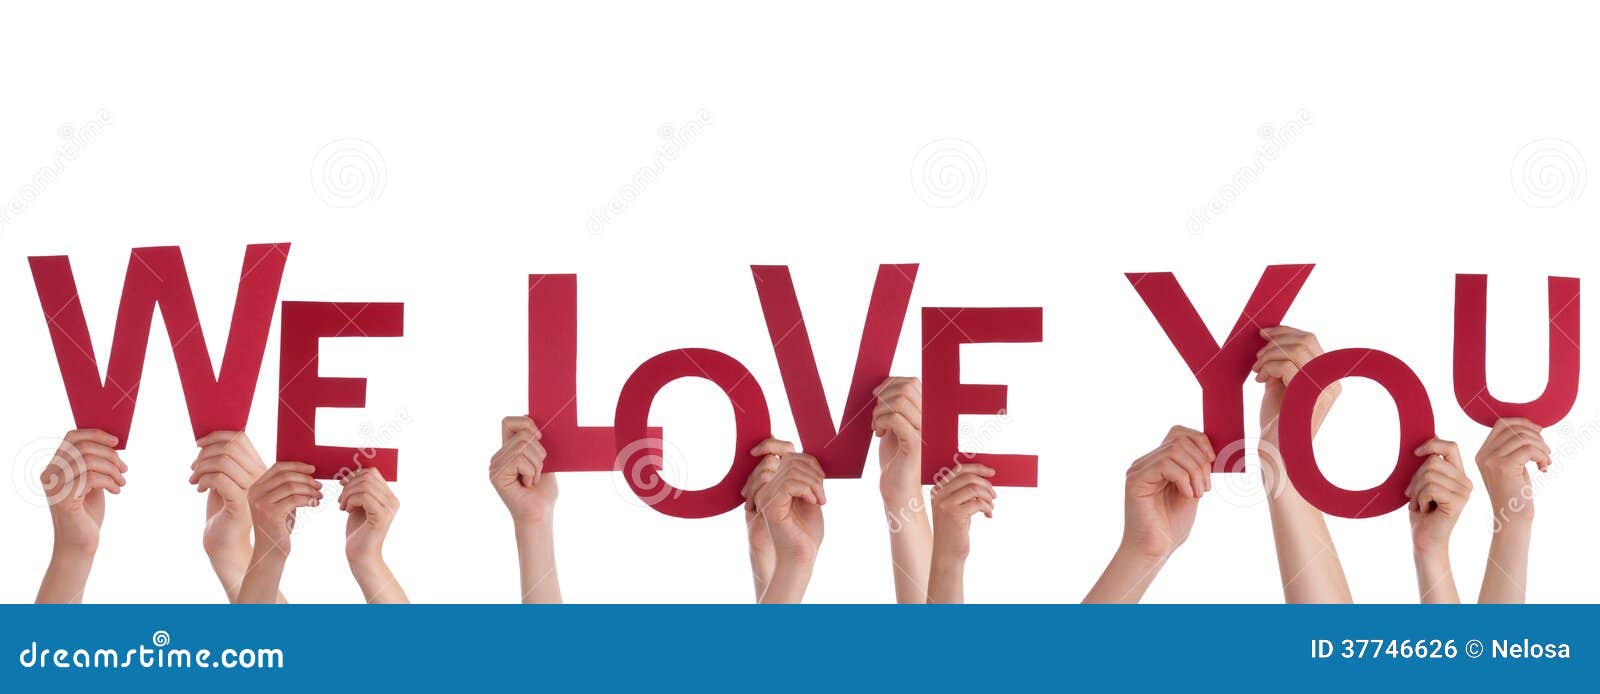 clipart we love you - photo #19